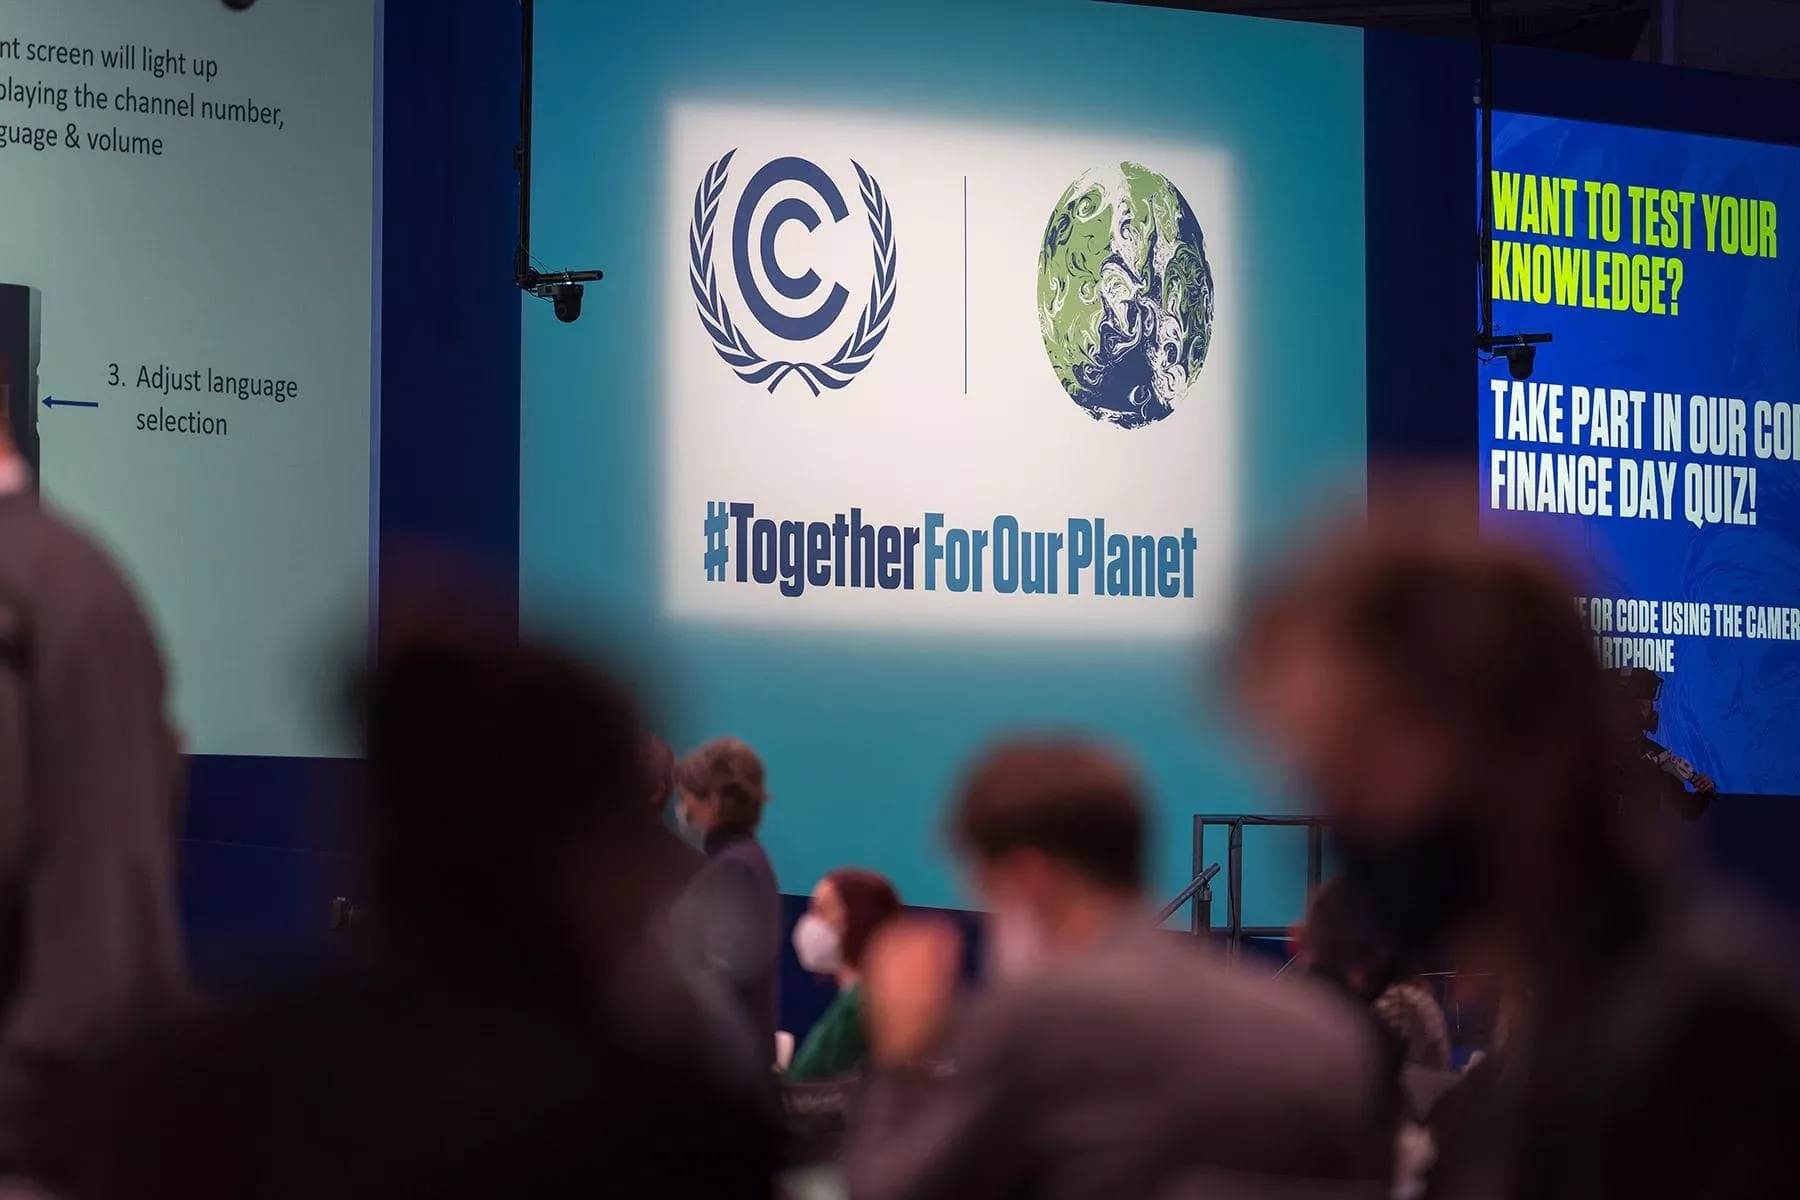 A concerted effort is needed at the national and global levels to counteract the climate crisis. Photo: LWF/Albin Hillert